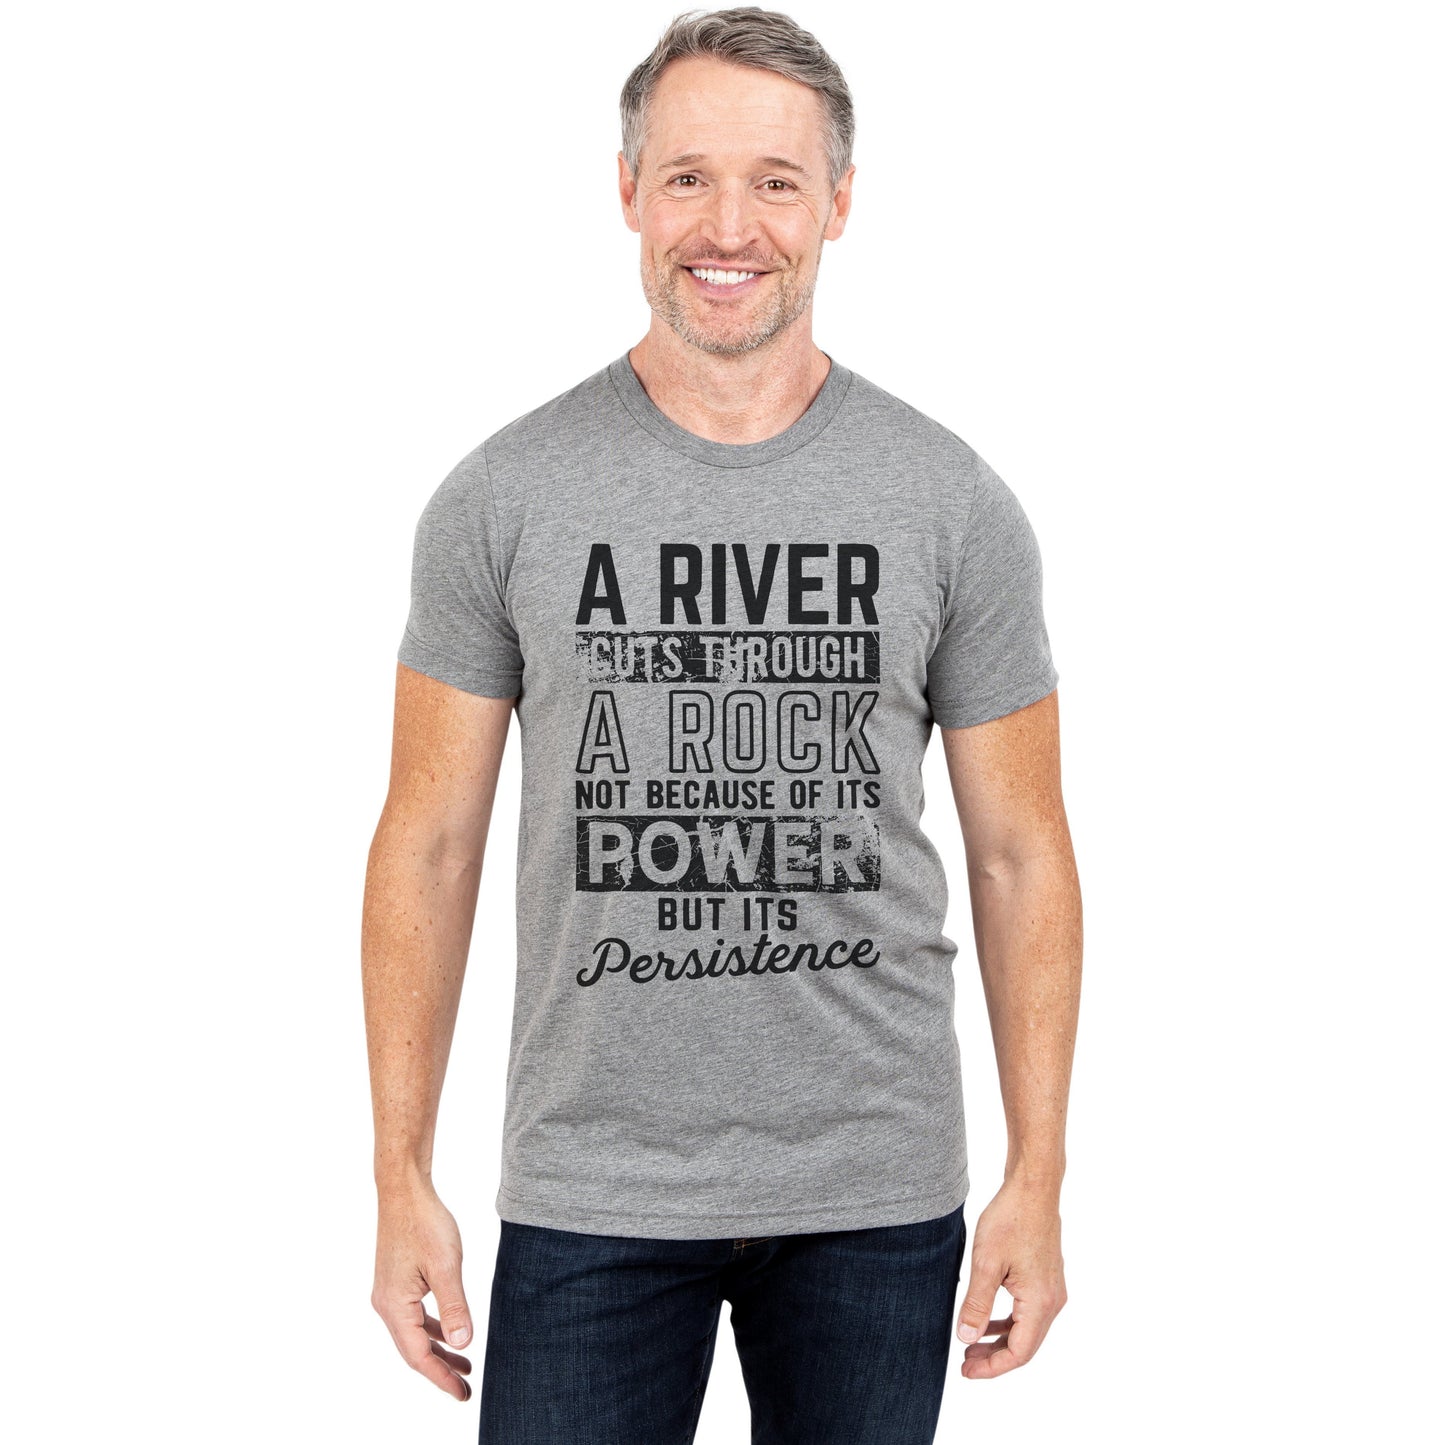 A River Cuts Through A Rock Not Because Of It's Power But It's Persistence Heather Grey Printed Graphic Men's Crew T-Shirt Tee Model